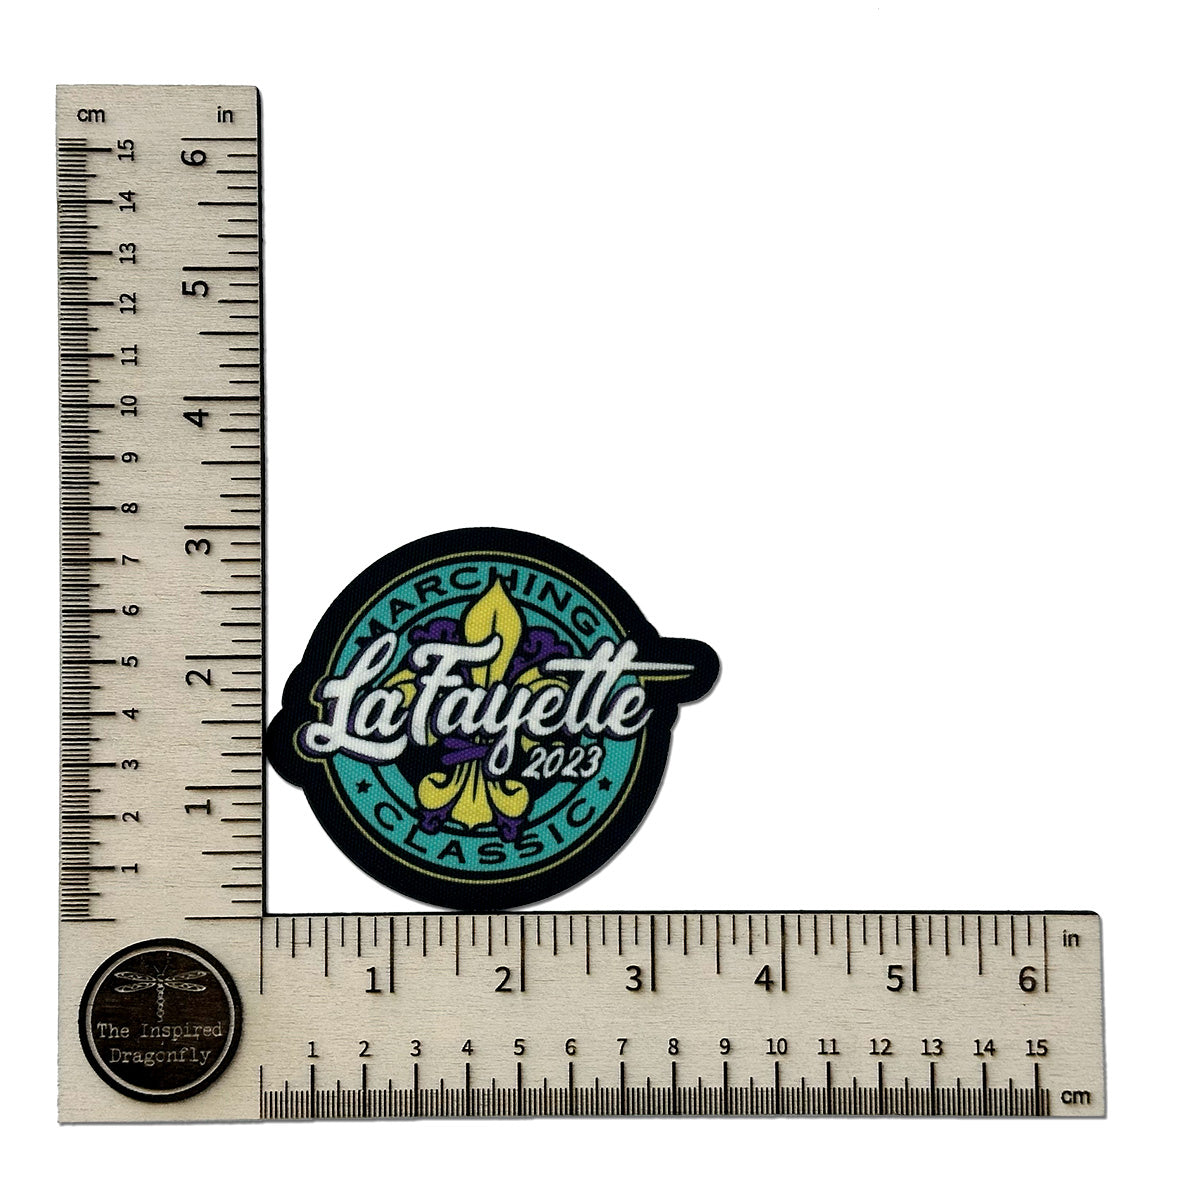 Fabric Patch - LaFayette Marching Classic 2023